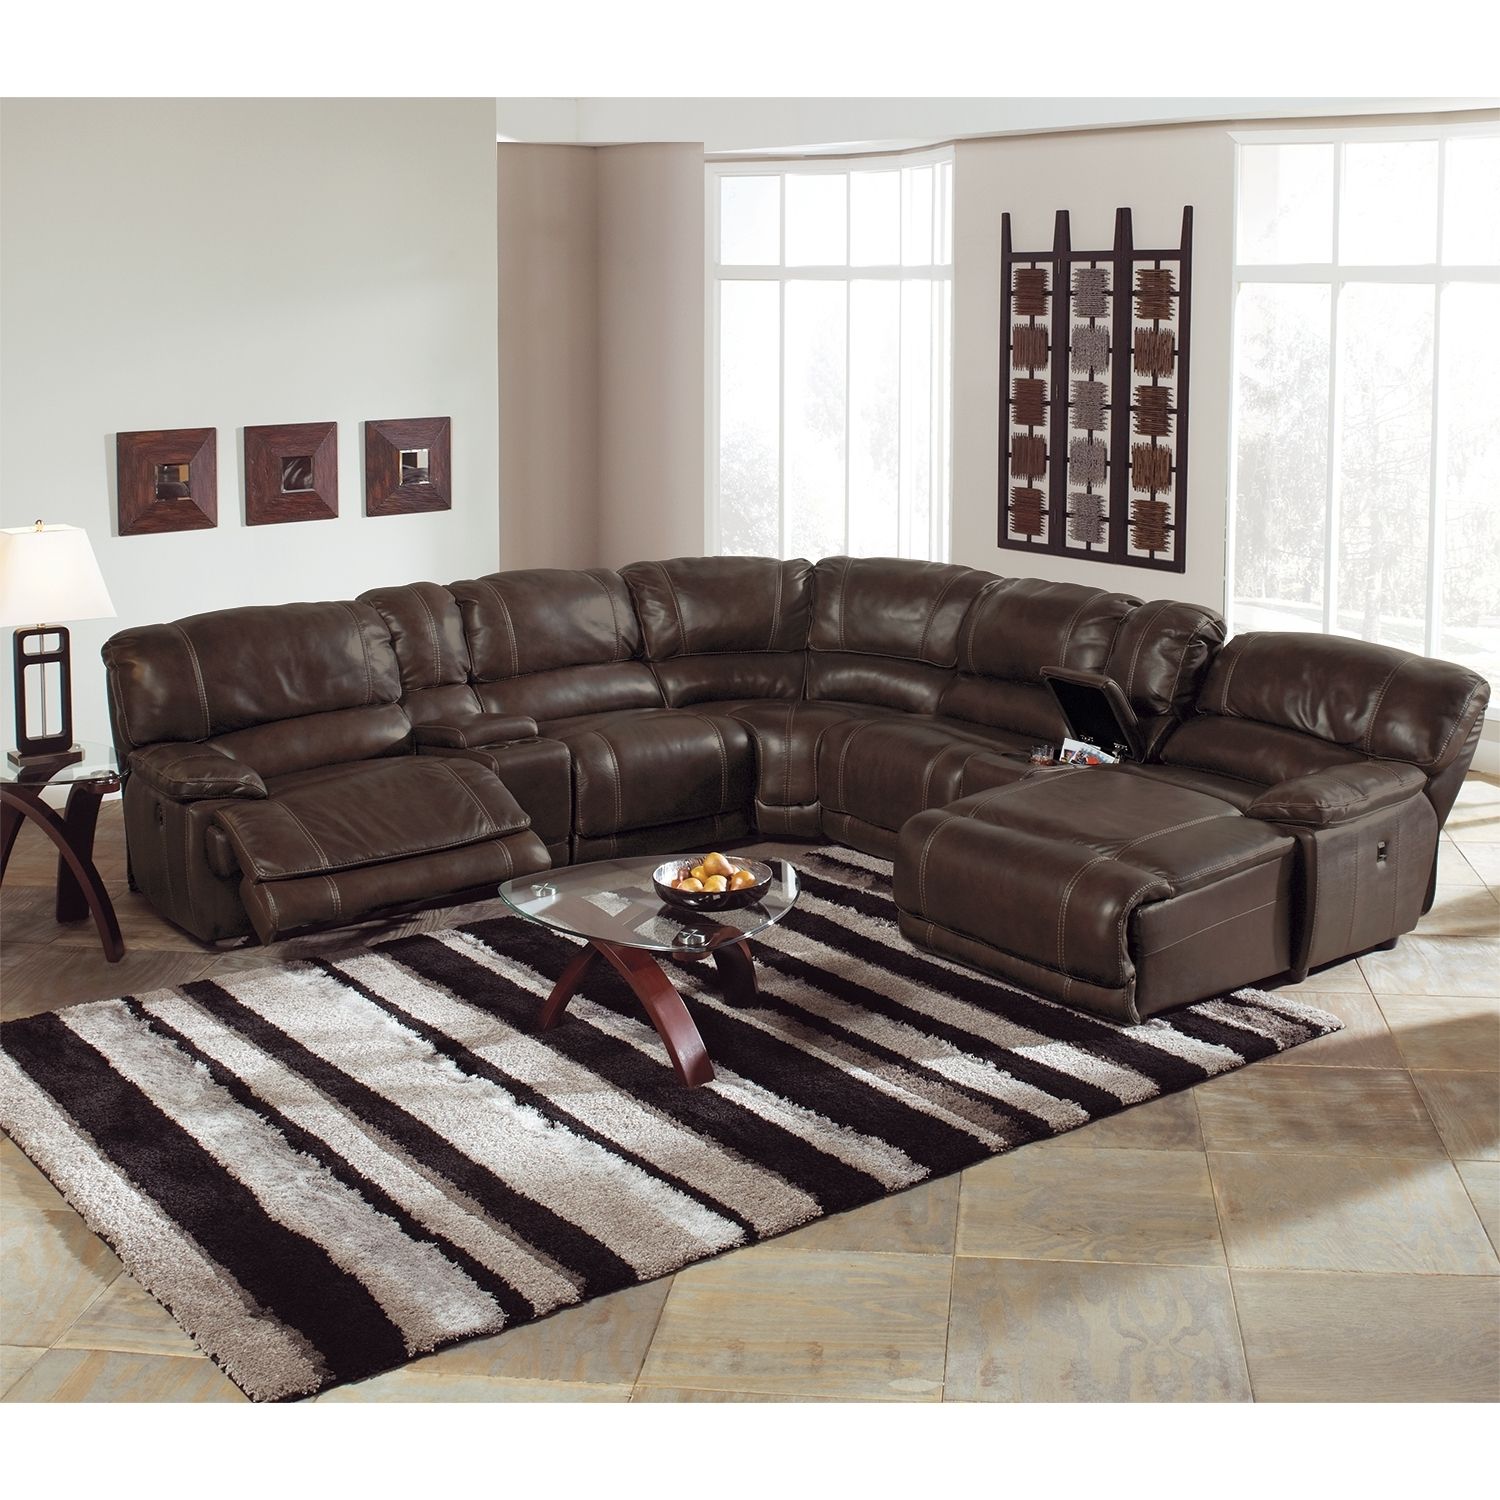 Sectional Sofas With Power Recliners With Well Known Leather Sofa Electric Recliner Used Sectional With Recliners (Photo 3 of 20)